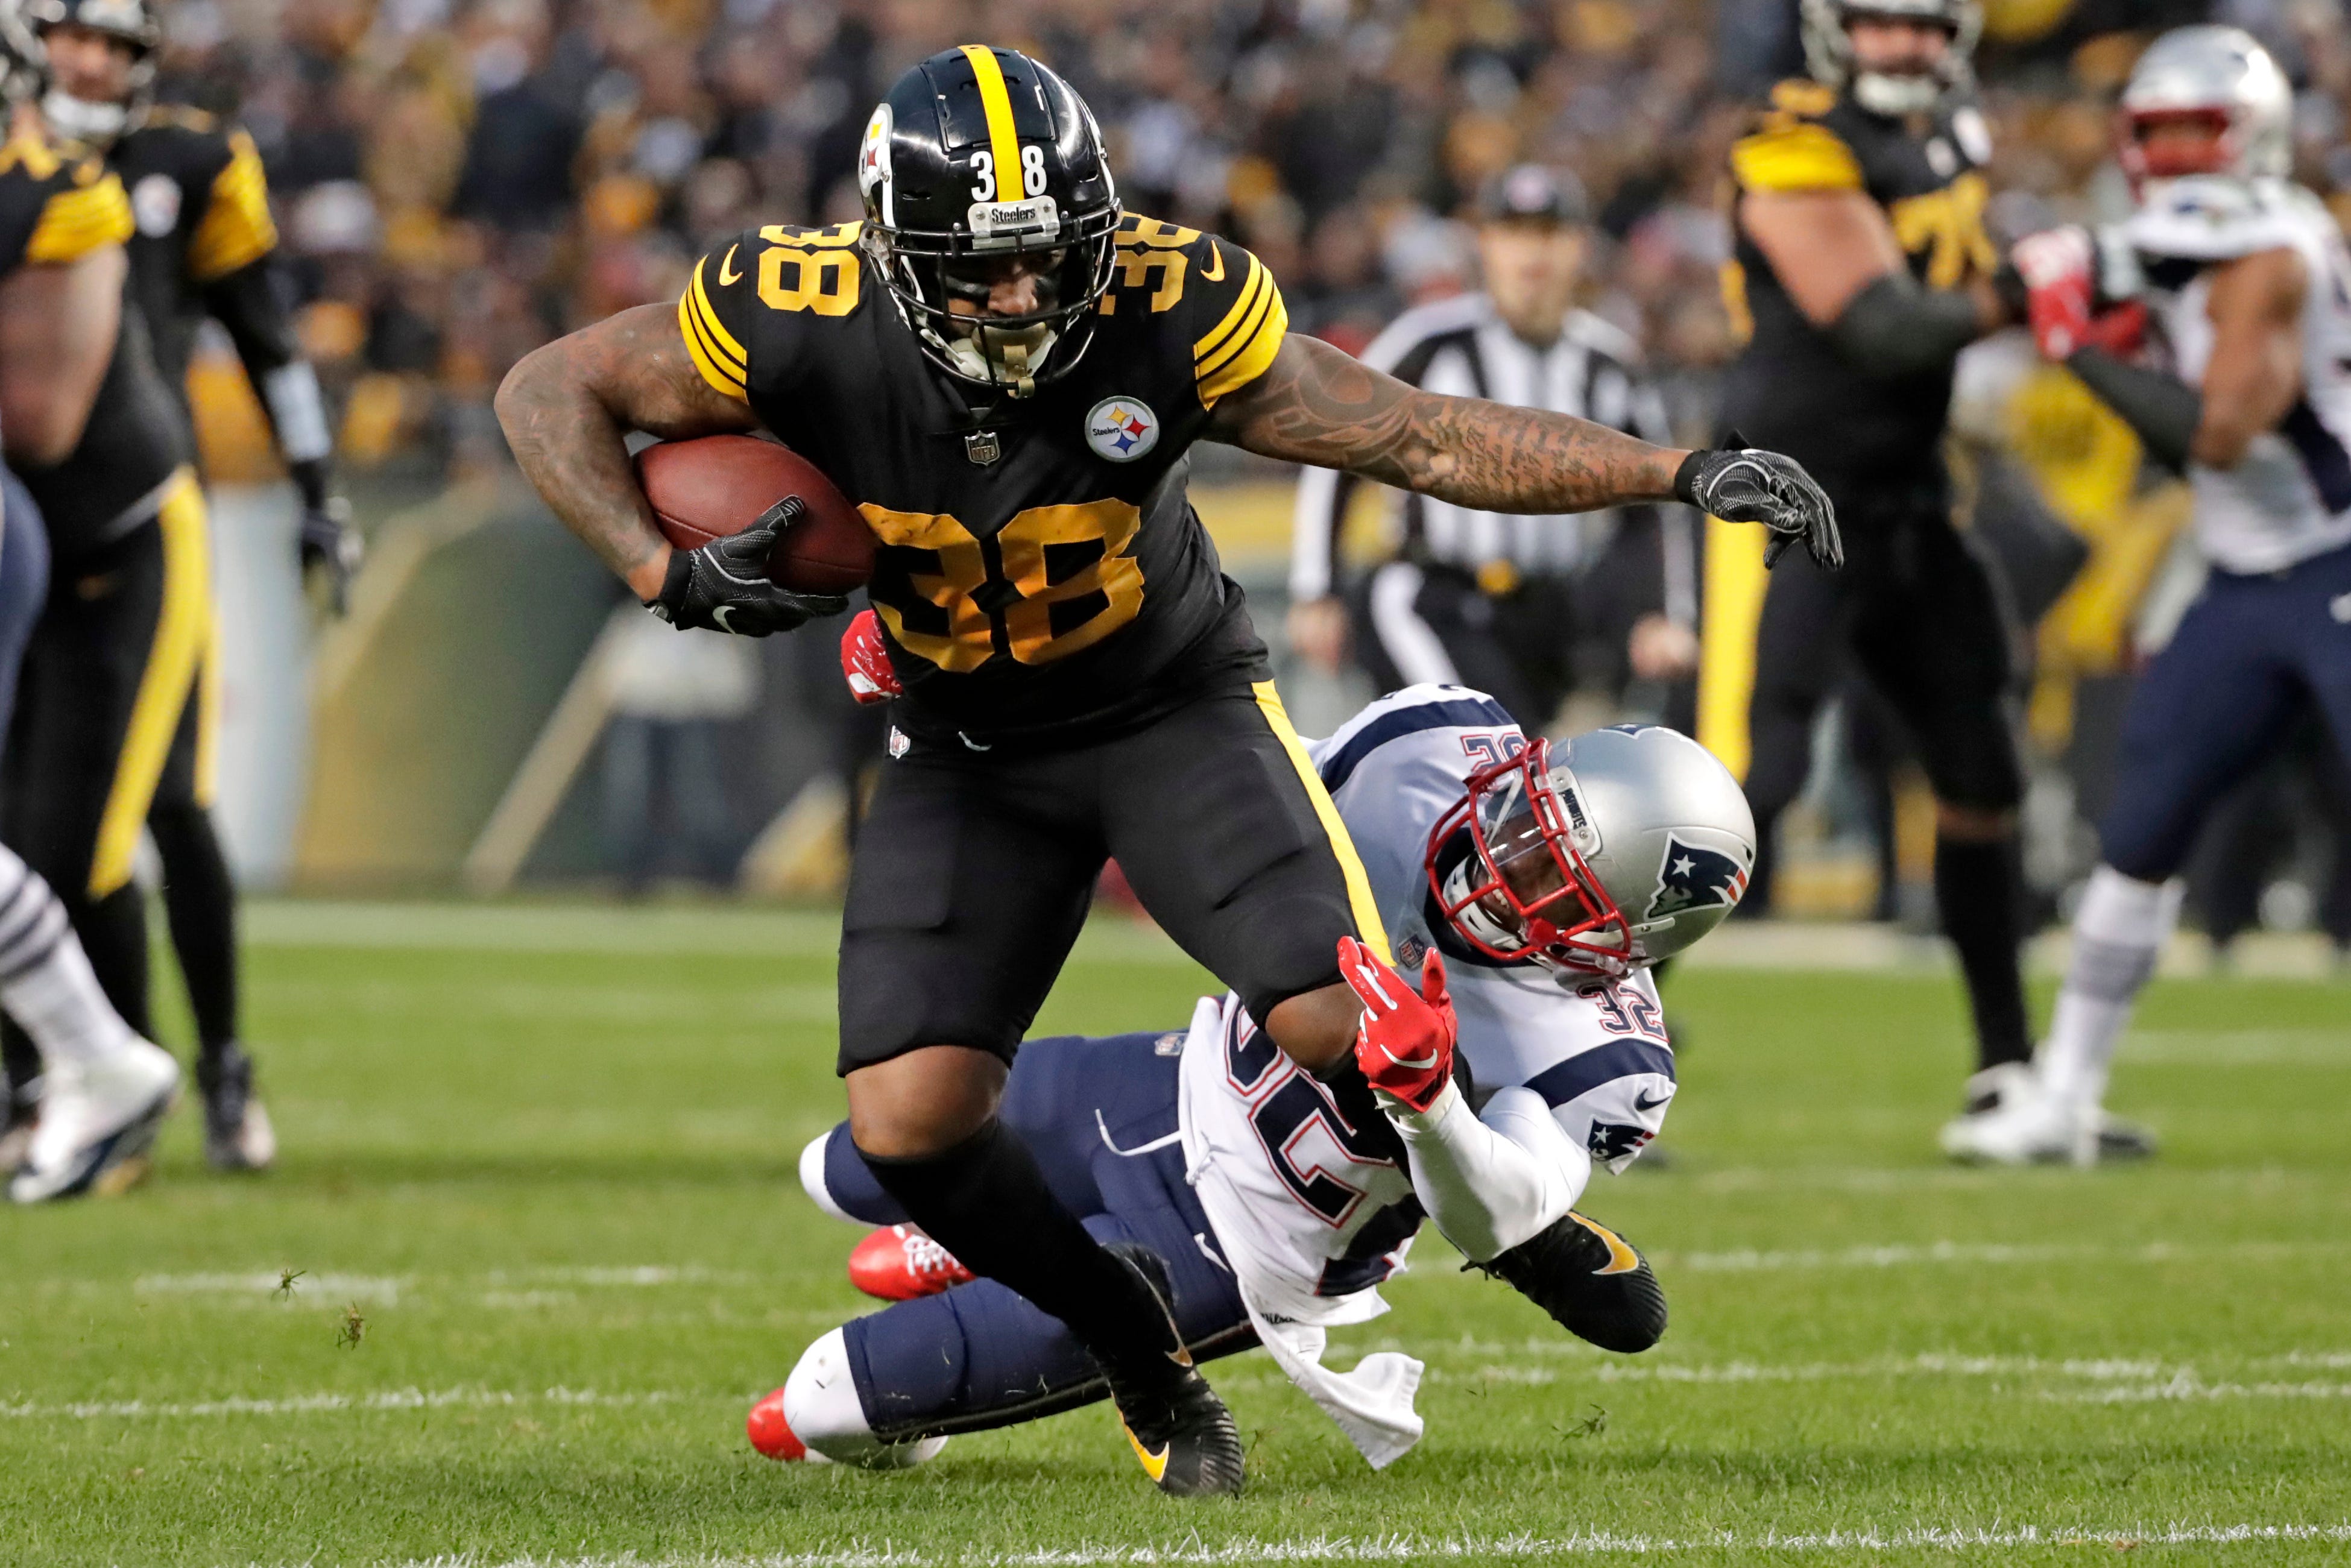 Pittsburgh Steelers running back Jaylen Samuels (38) is tackled by New England Patriots free safety Devin McCourty during the first half on Sunday.